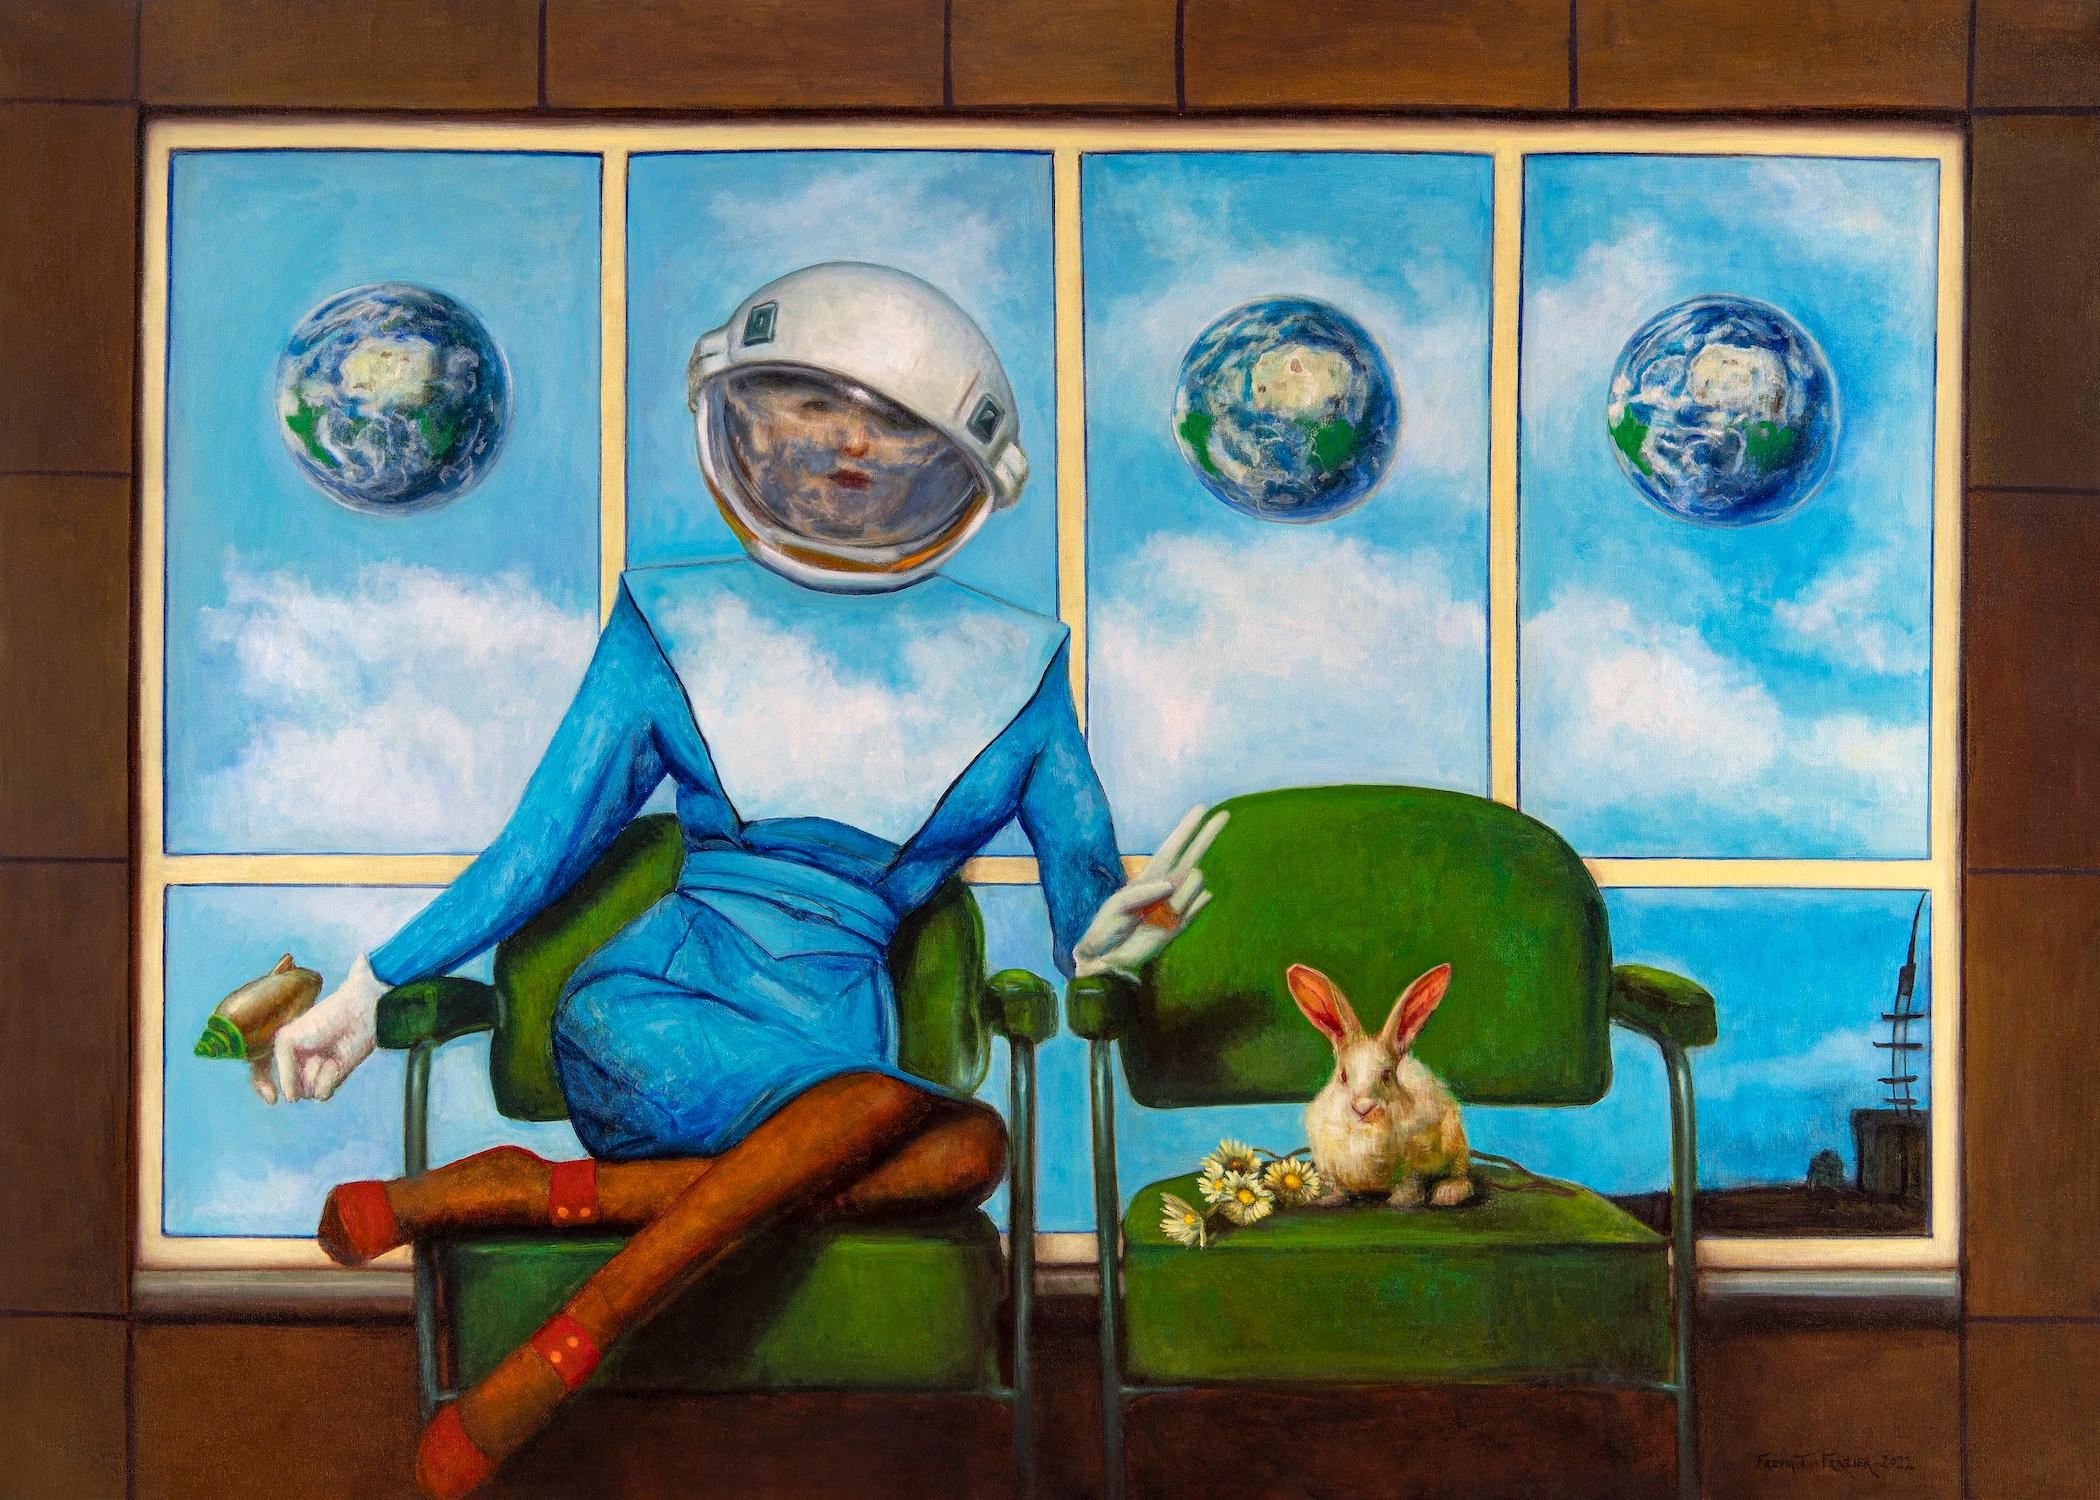 Come In Peace - Futuristic Woman in Space Suit Seated Next to a Bunny